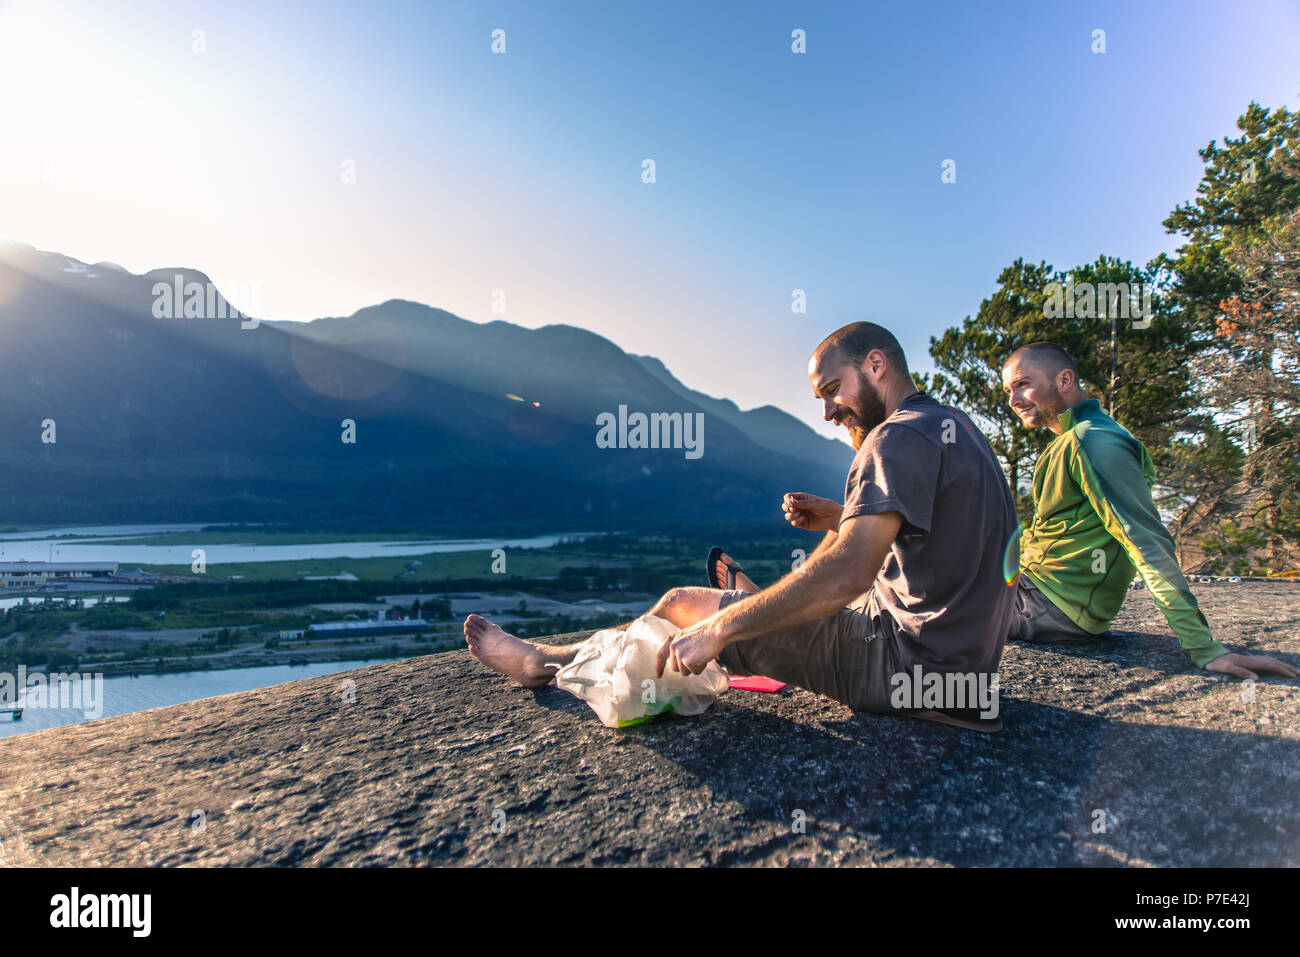 Friends relaxing on mountain corniche surplombant lake, Squamish, Canada Banque D'Images